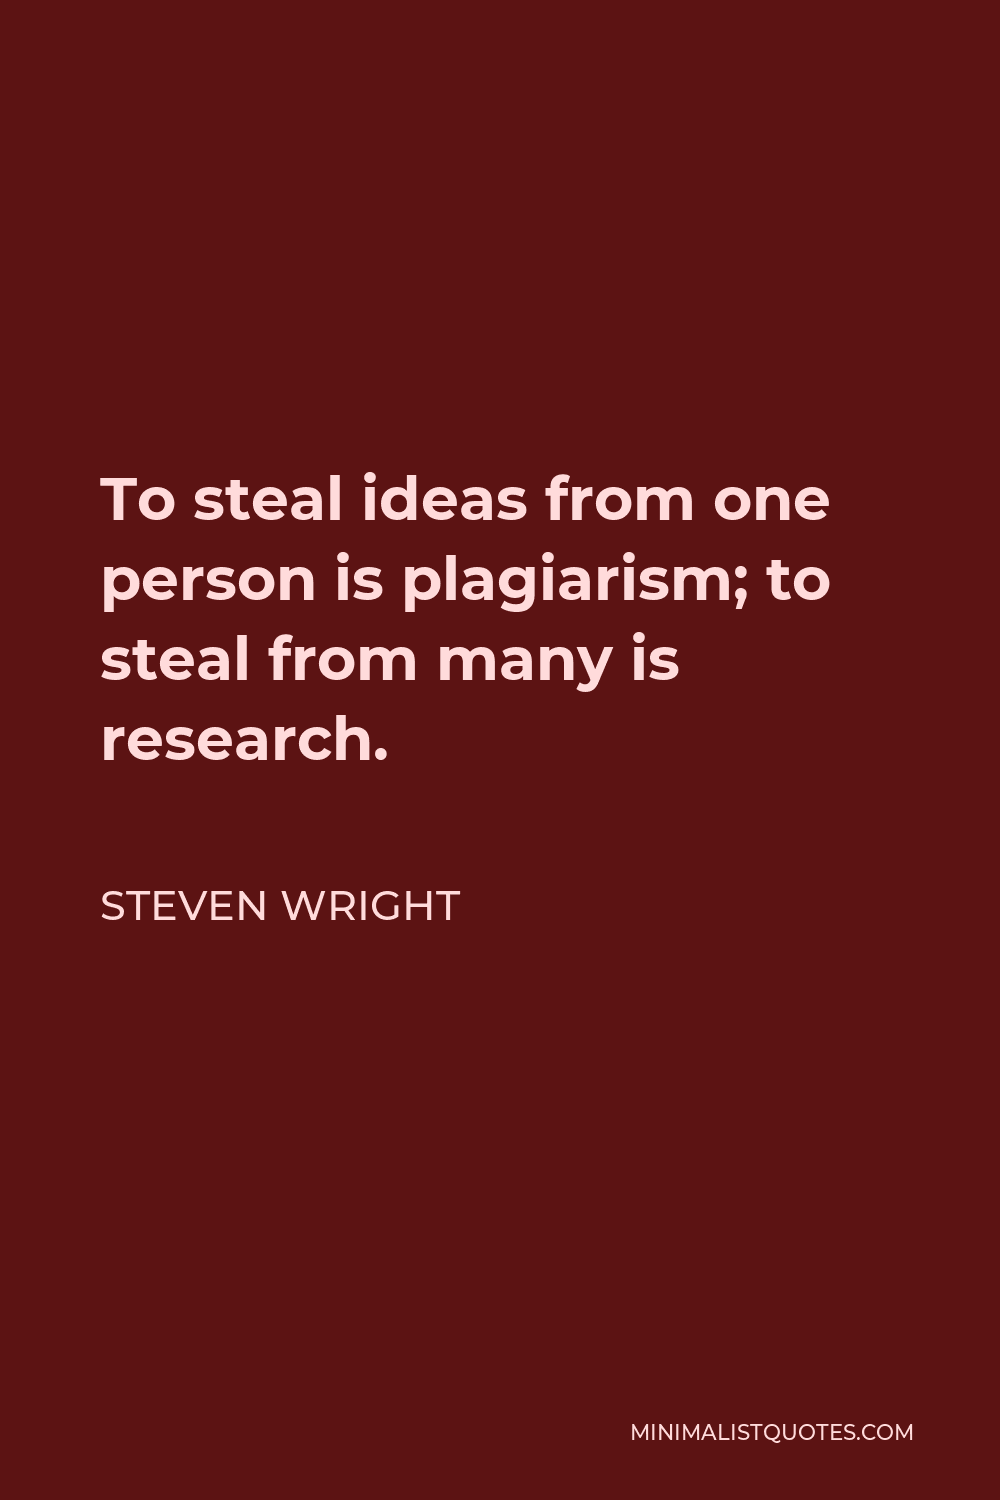 Steven Wright Quote - To steal ideas from one person is plagiarism; to steal from many is research.